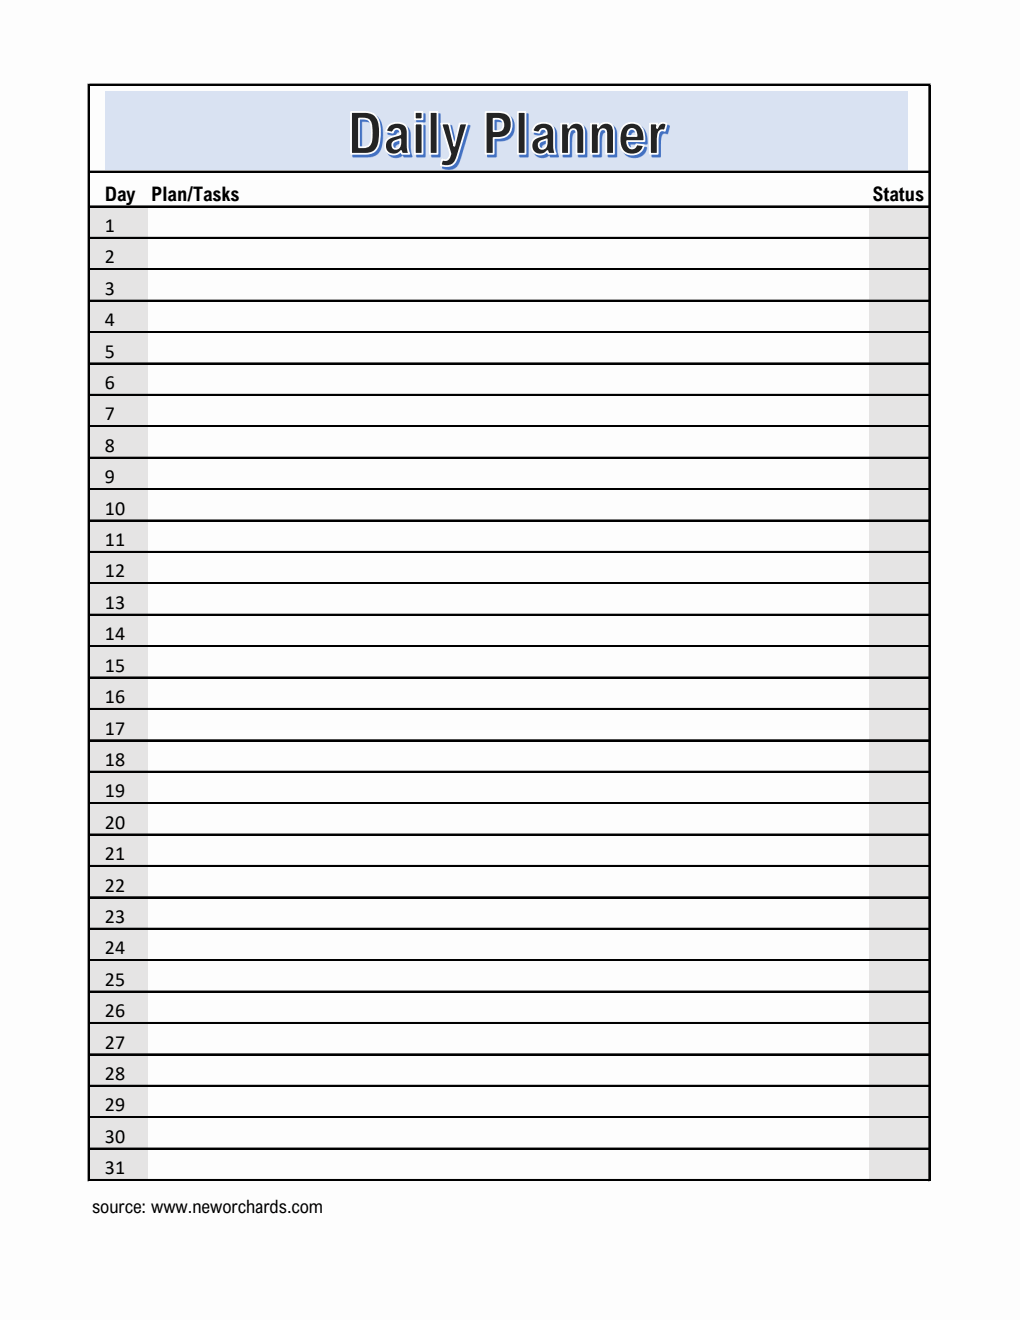 Monthly Planner and Checklist Template in Excel